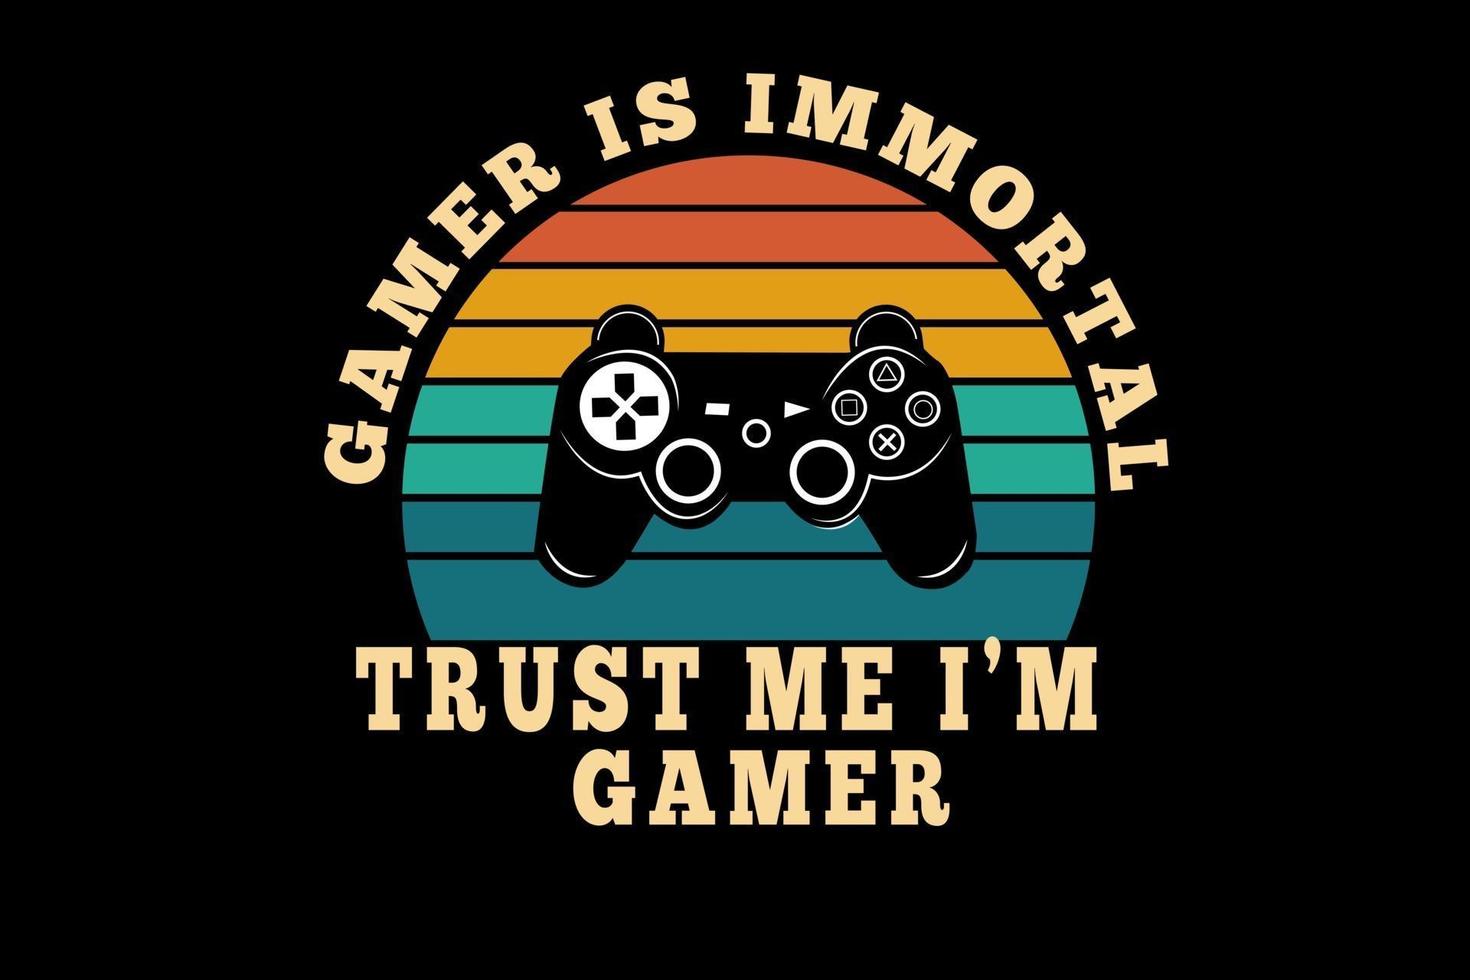 gamer is immortal trust me i'm gamer color orange yellow and green vector